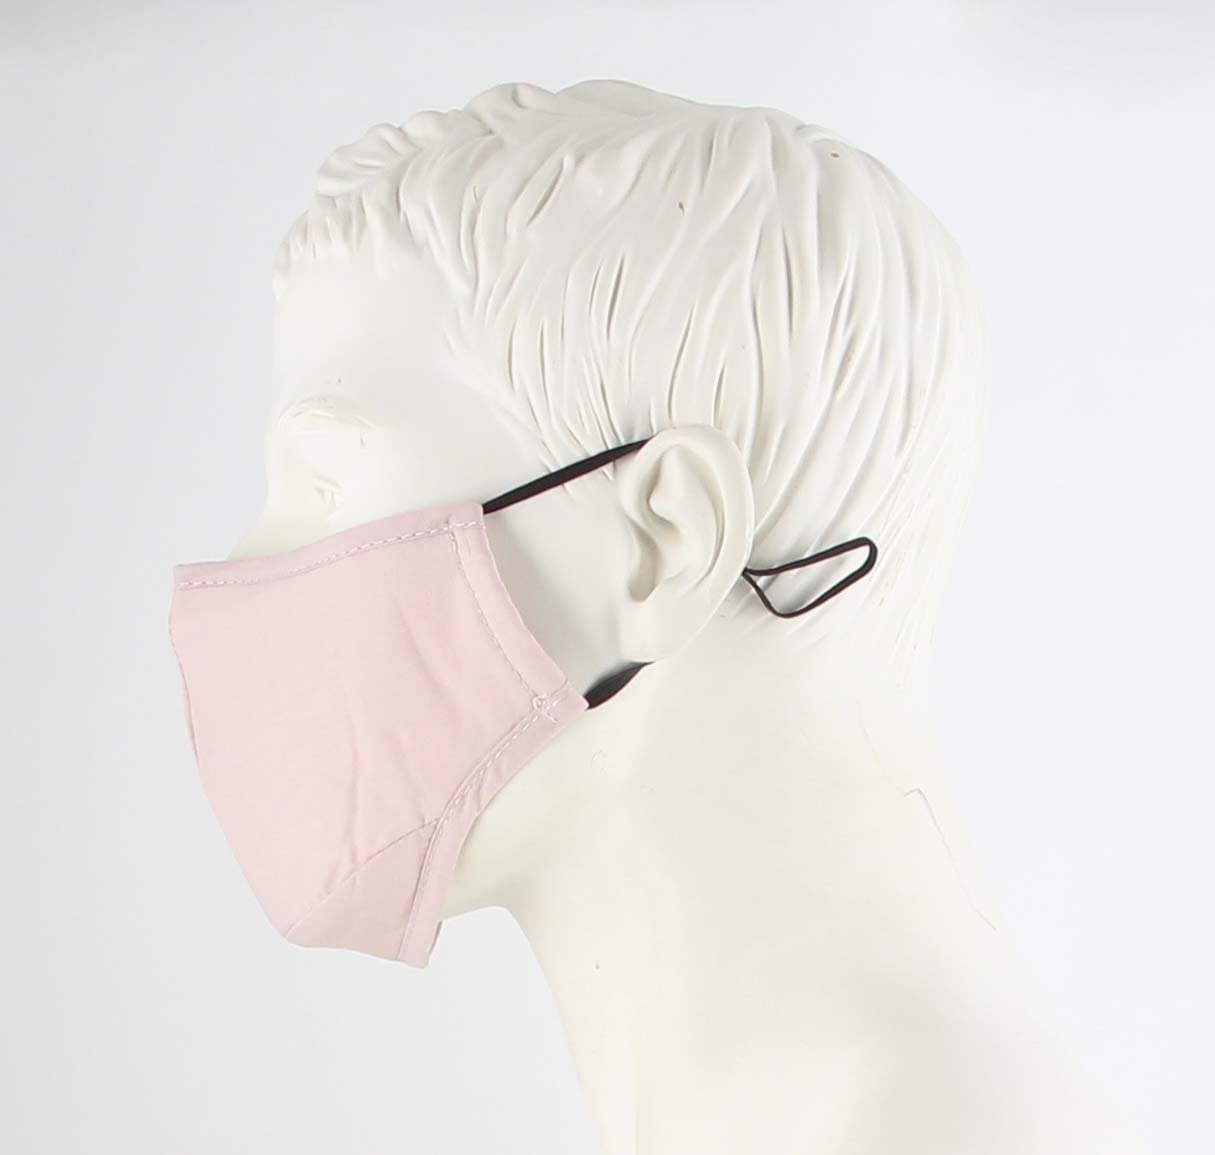 PACK OF 2 FABRIC FACE MASKS GREY/BLUSH